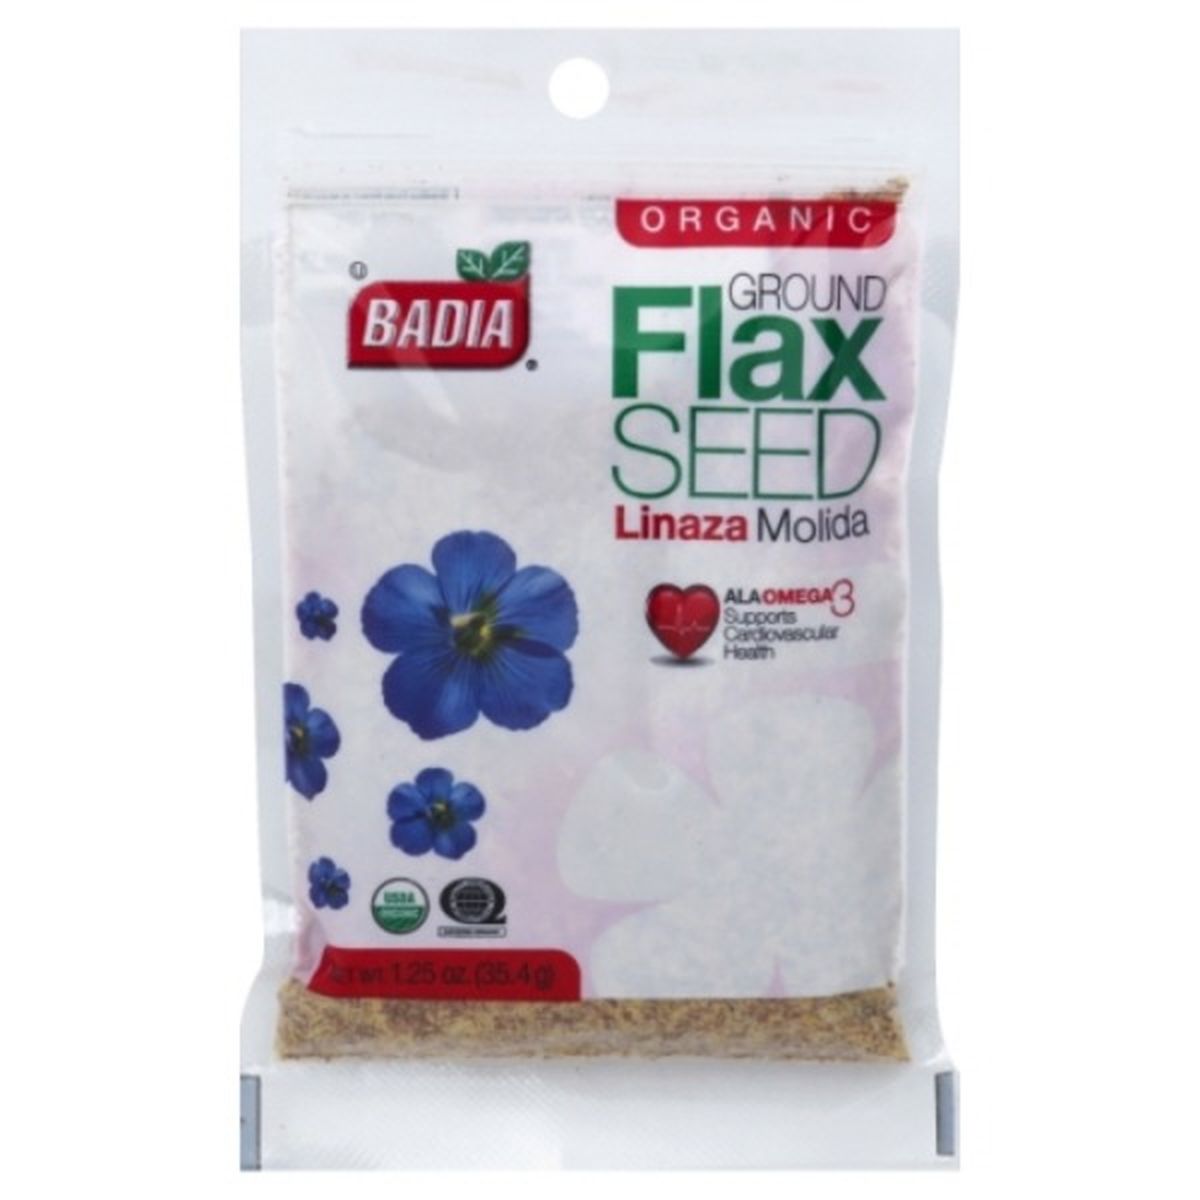 Calories in Badia Spices Flax Seed, Organic, Ground